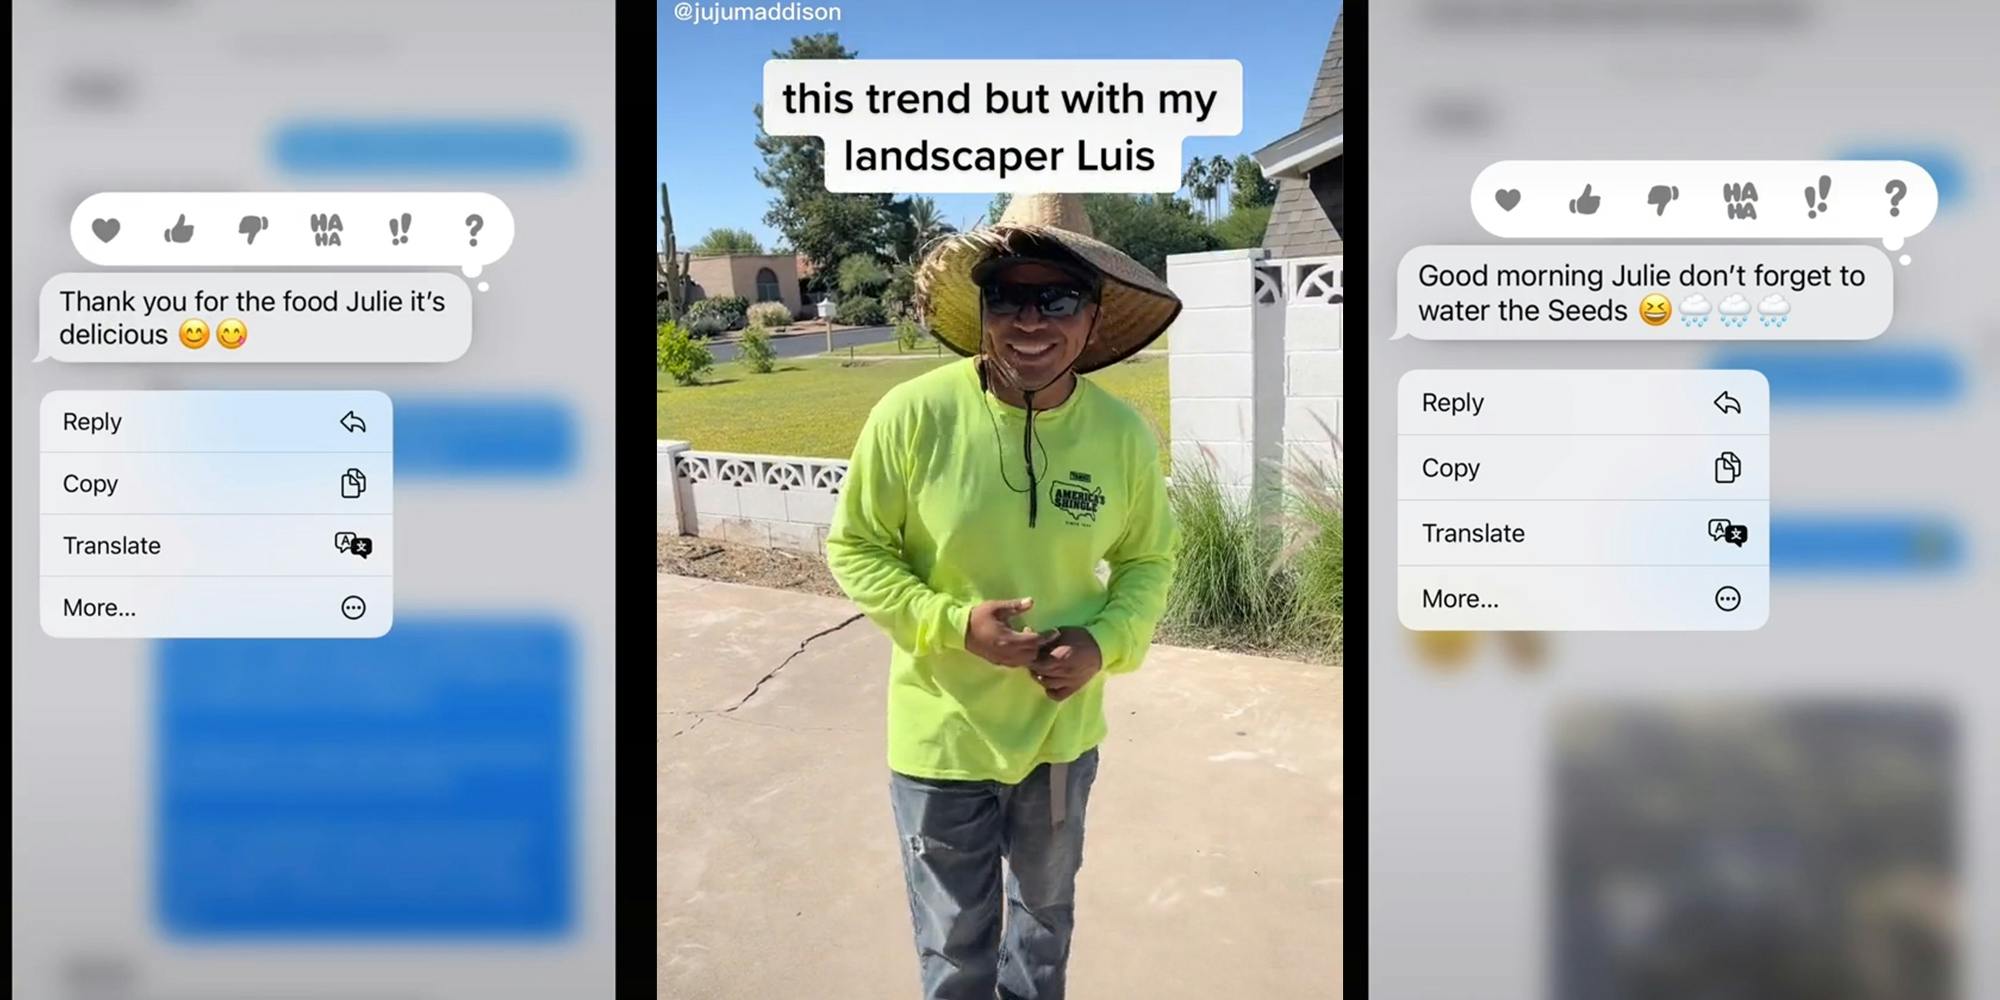 text message "Thank you for the food Julie it's delicious" (l) Man in driveway with caption "this trend but with my landscaper Luis" (c) text message "Good morning Julie don't forget to water the Seeds" (r)